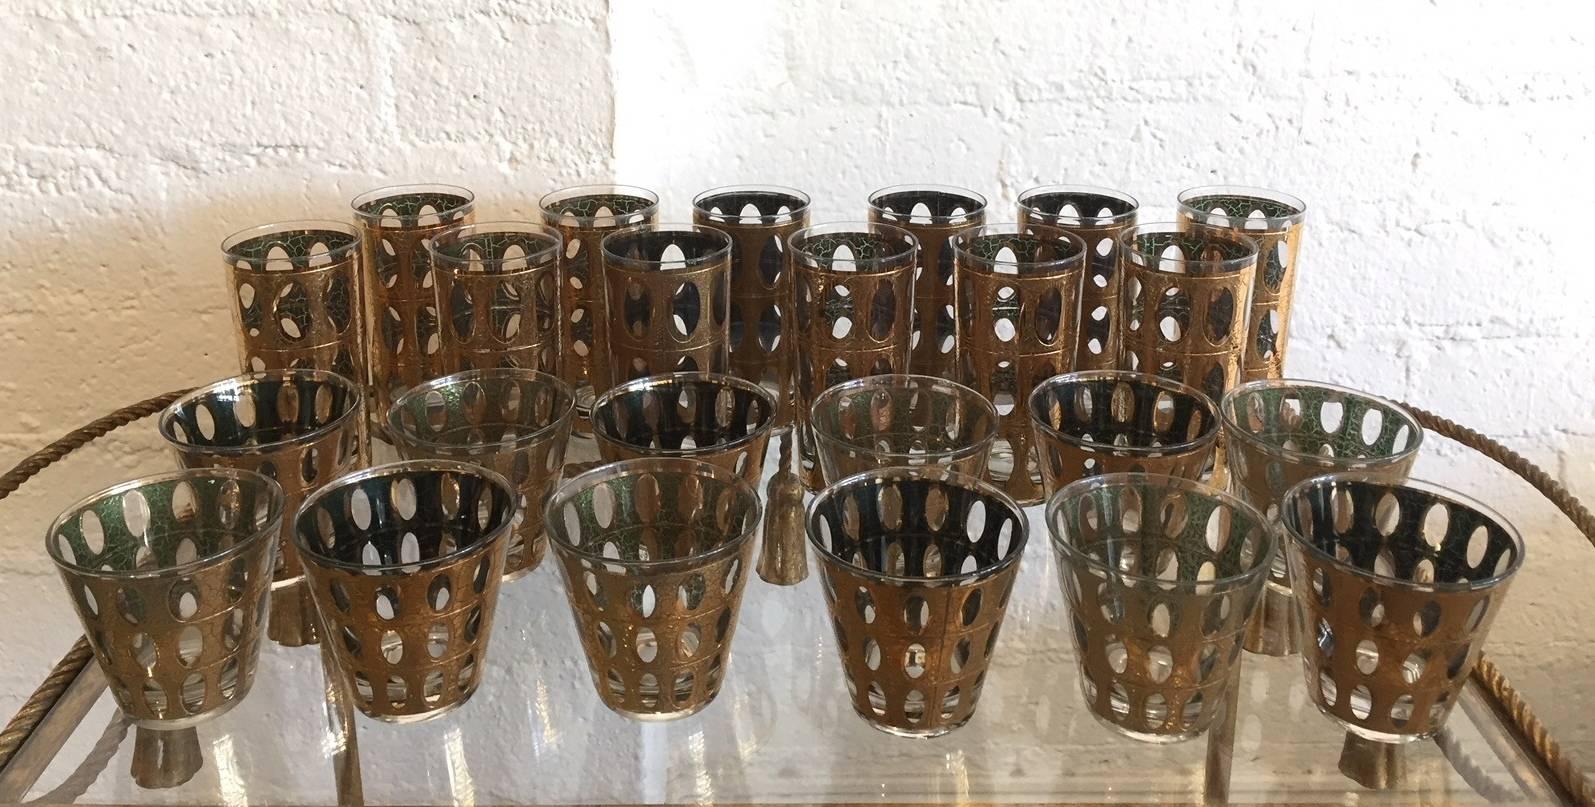 A set of signed 22-karat gold Culver cocktail glasses comprised of 12 high ball glasses and 12 low ball or whiskey glasses. They are in excellent vintage condition. They do need to be hand washed. The tall glasses measure 5 5/8